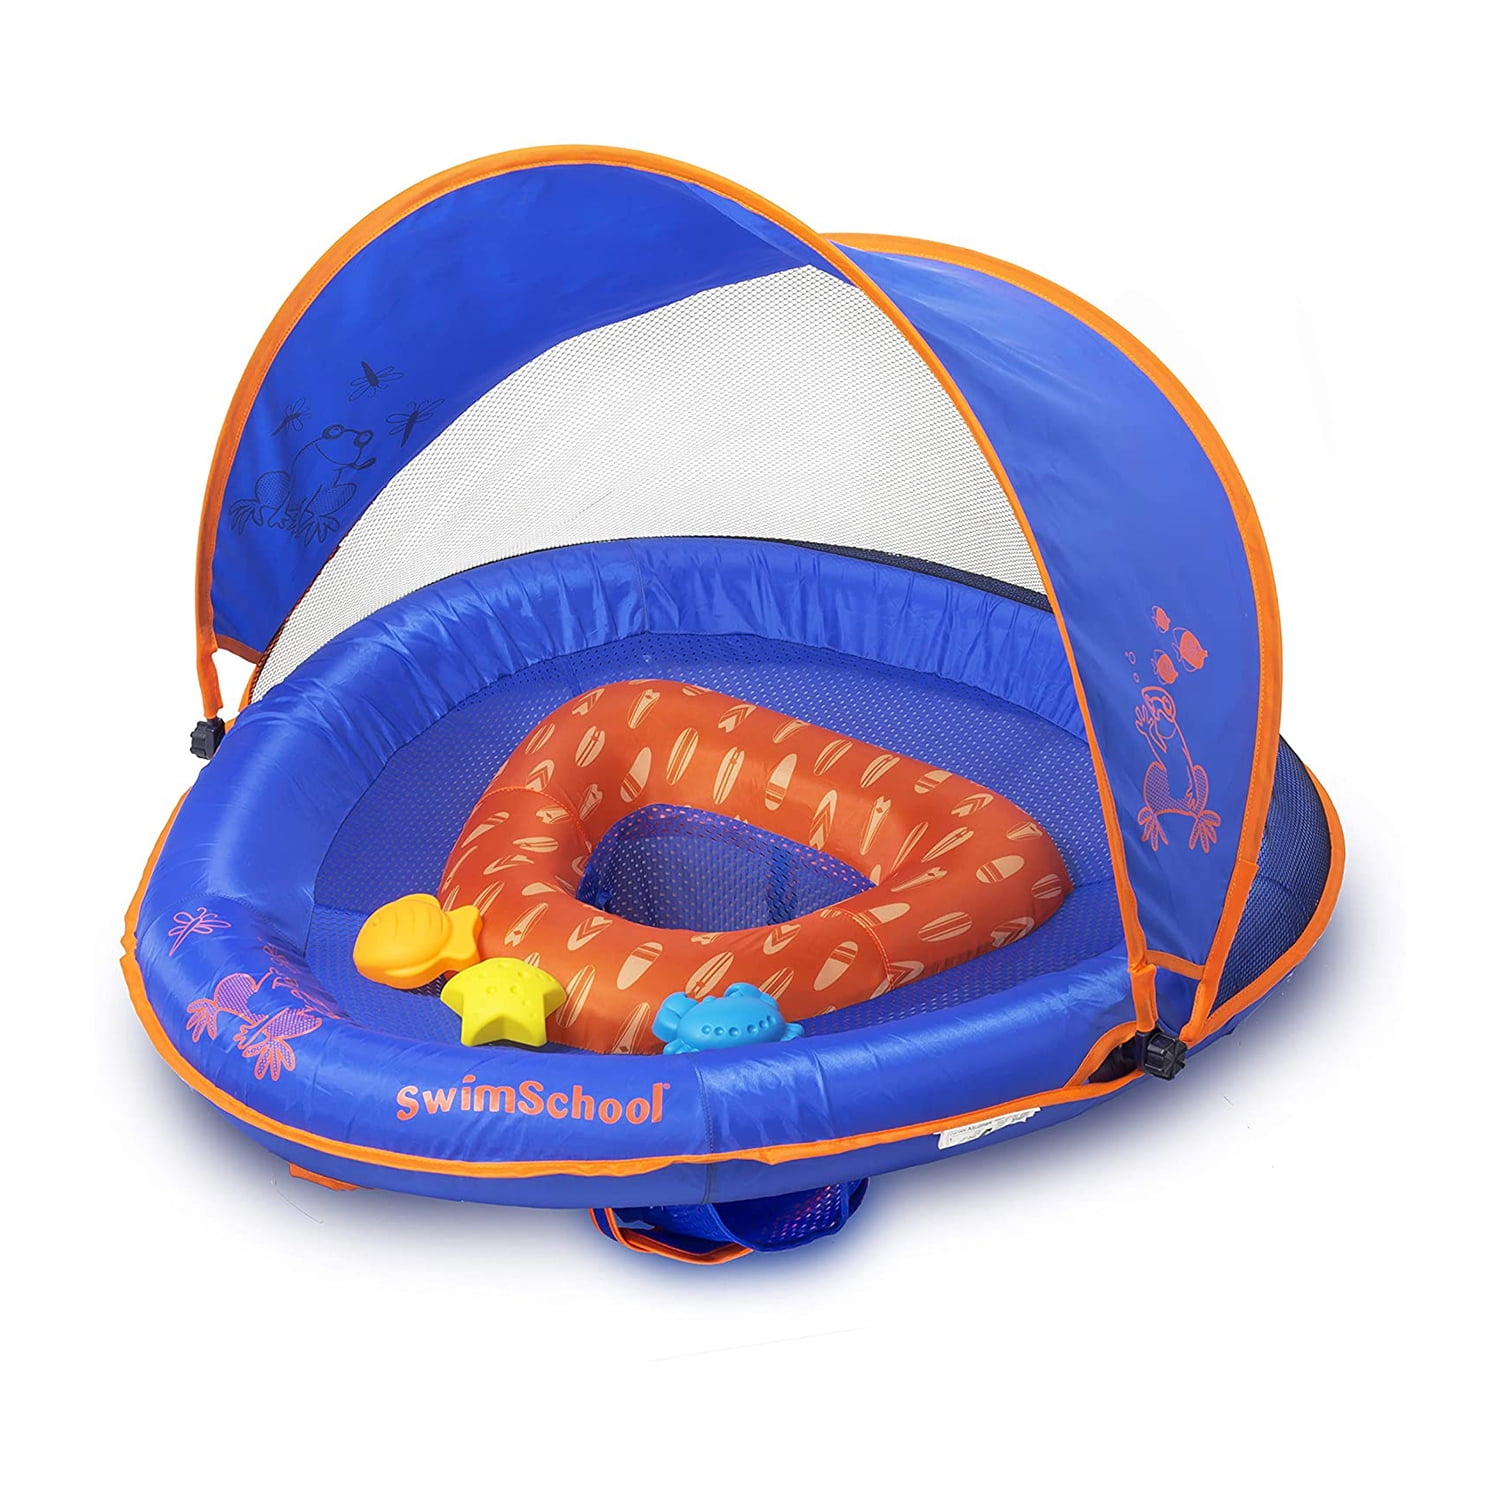 SwimSchool Unicorn Baby Boat Canopy Pool Float Sunshade UPF 50 6-18 Months A8 for sale online 